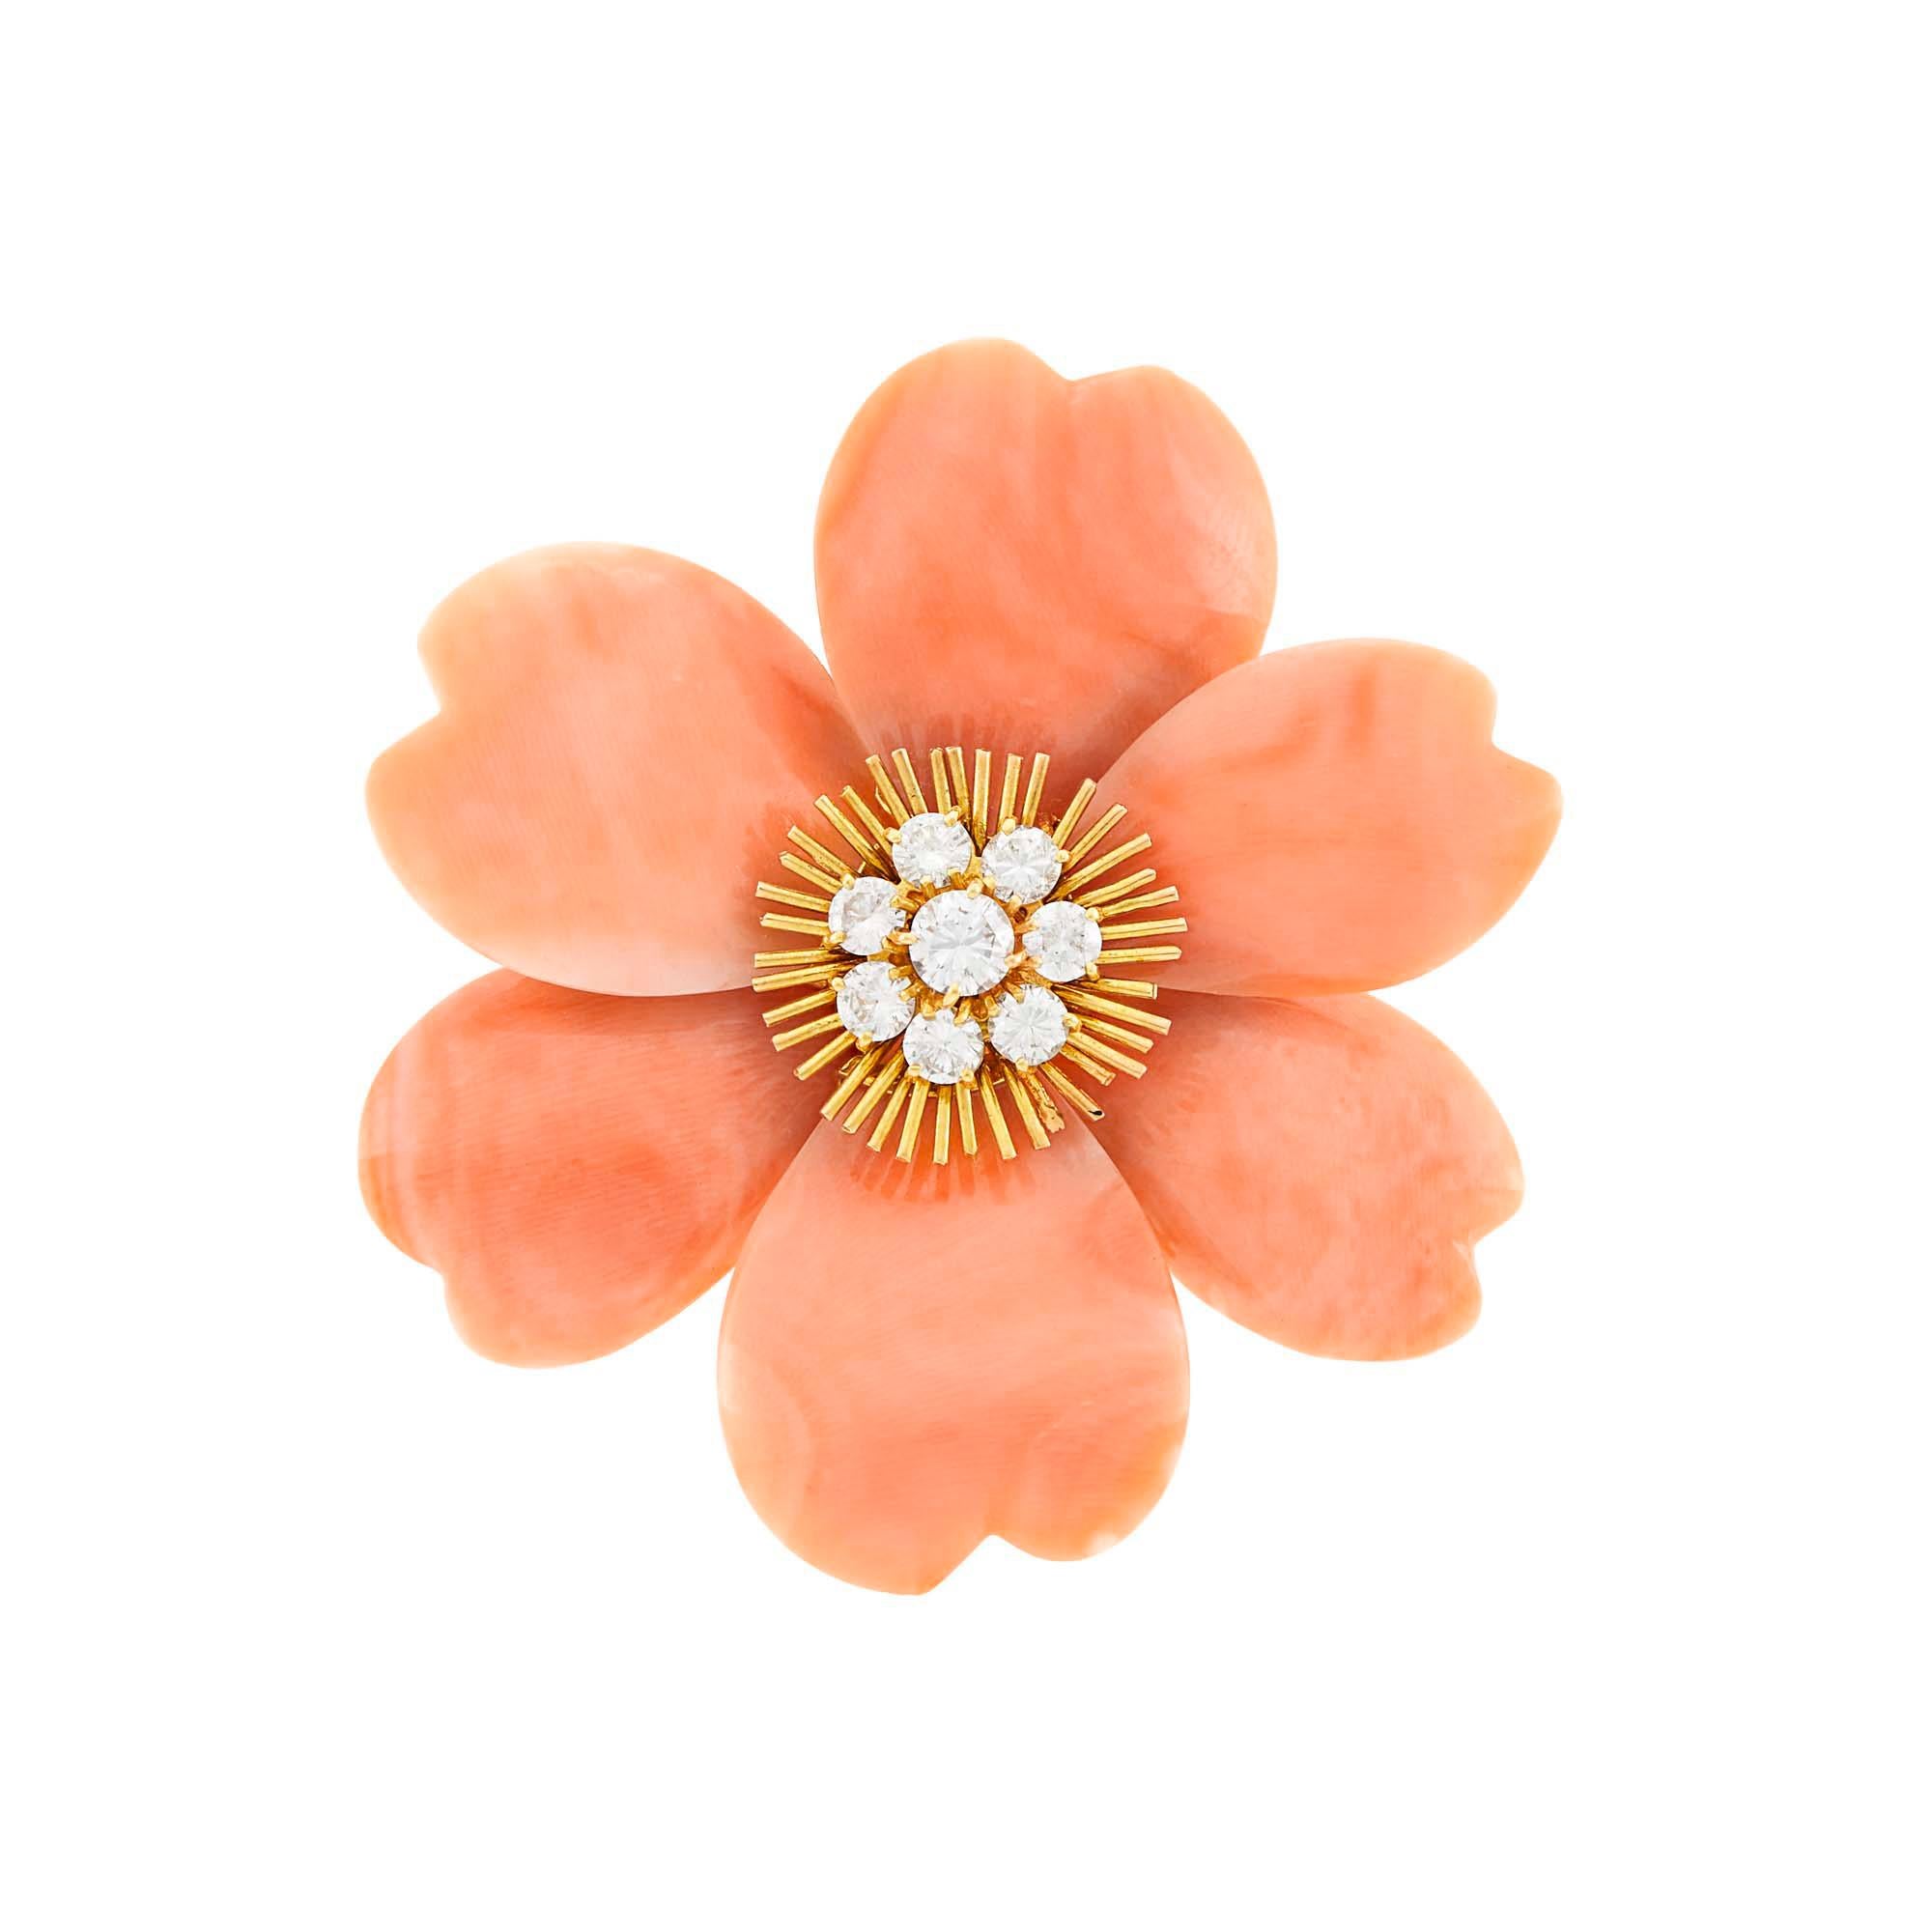 Van Cleef & Arpels Gold, Angel Skin Coral and Diamond 'Rose de Noel' Clip- Brooch, France This flower shaped pin has heart-shaped angel skin coral petals centering a floret of 8 round diamonds ap. 1.30 carats.  within polished radiating stamens all